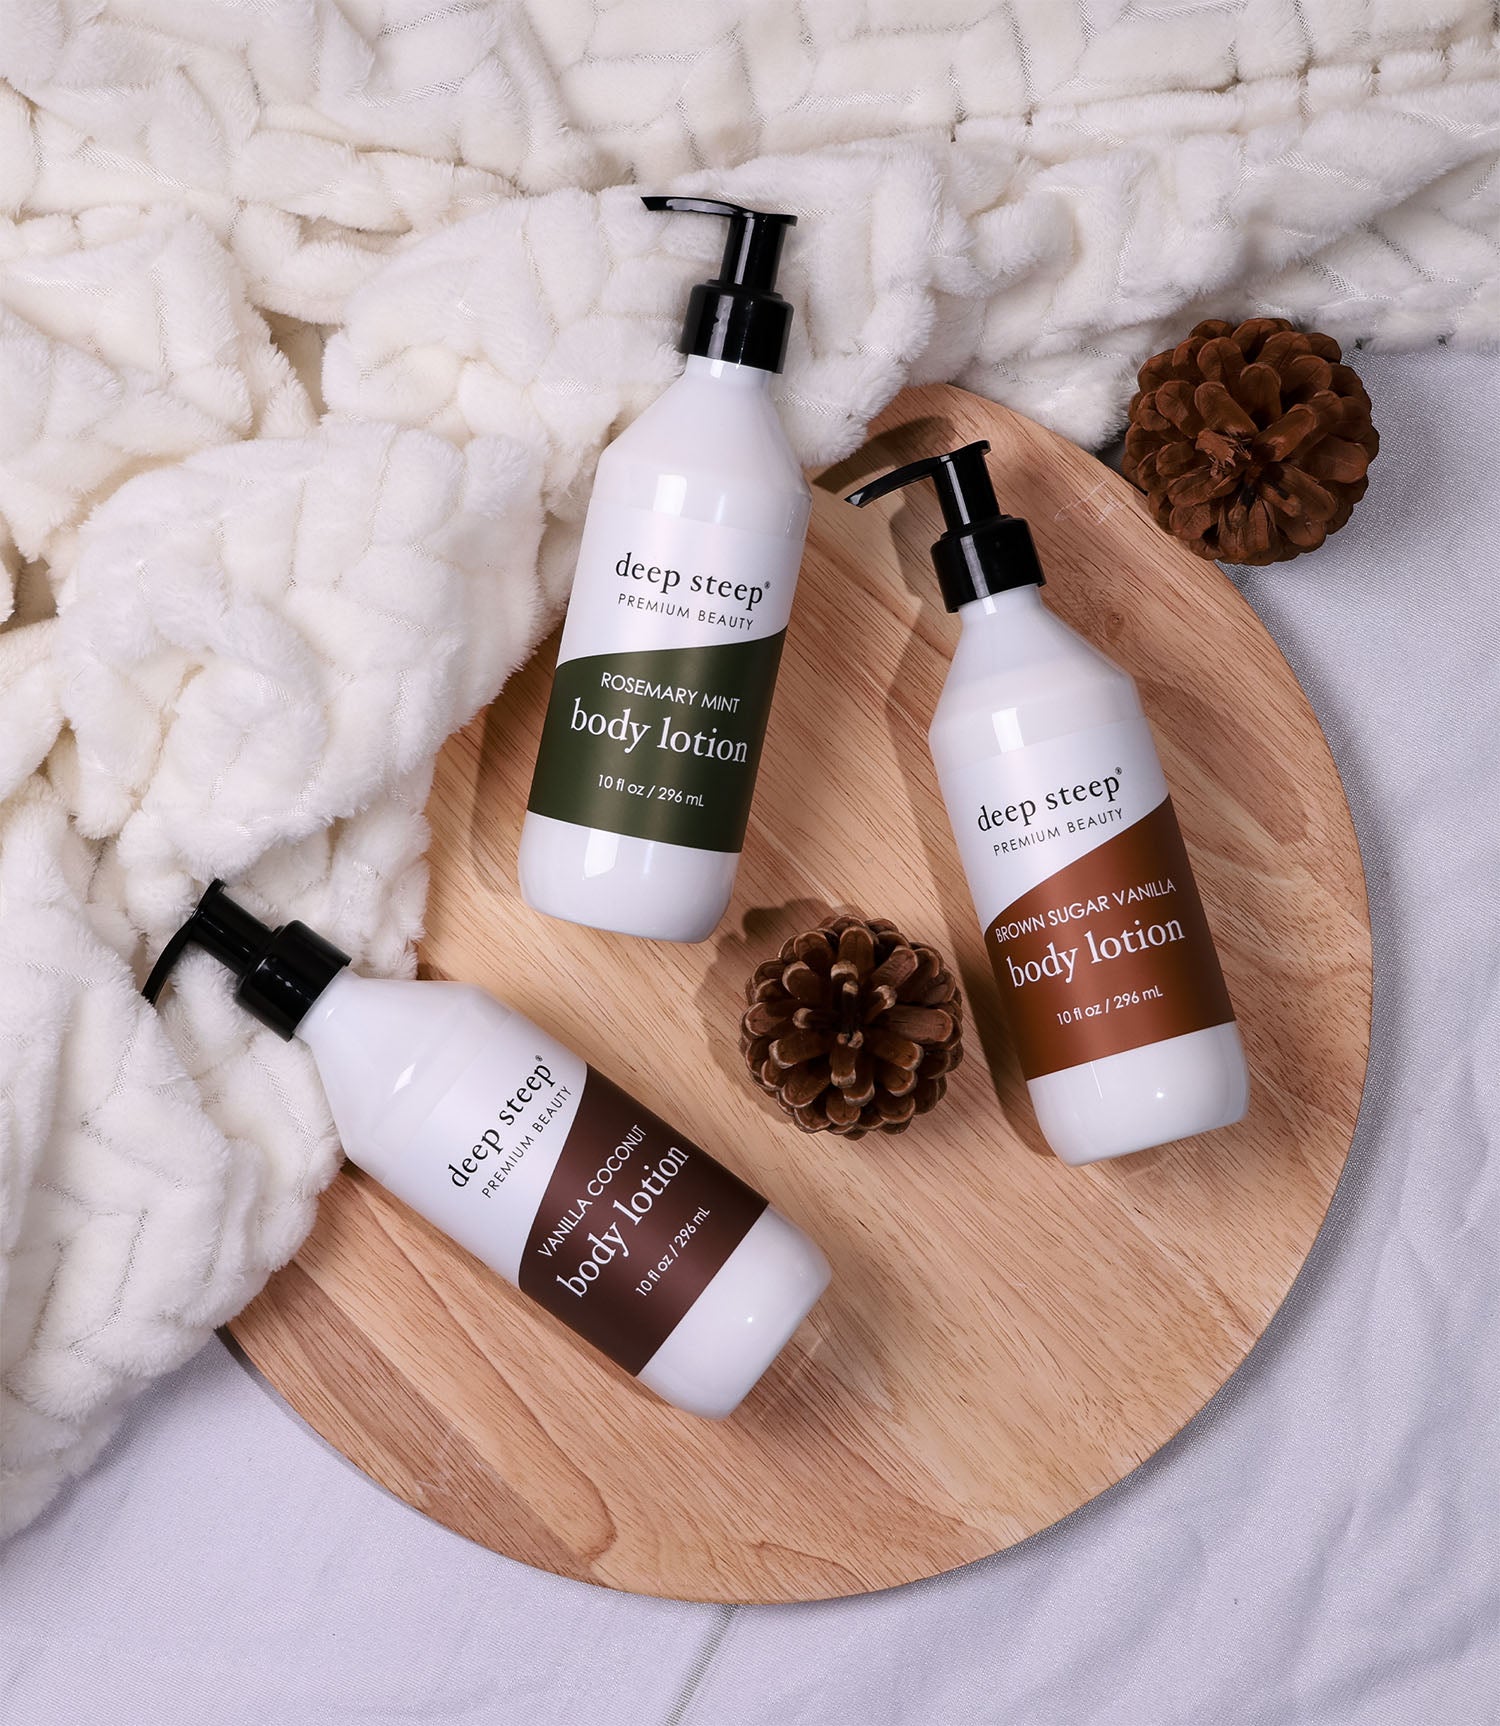 product photo of Deep Steep's body lotions laid out on a wooden board with a blanket and acorns